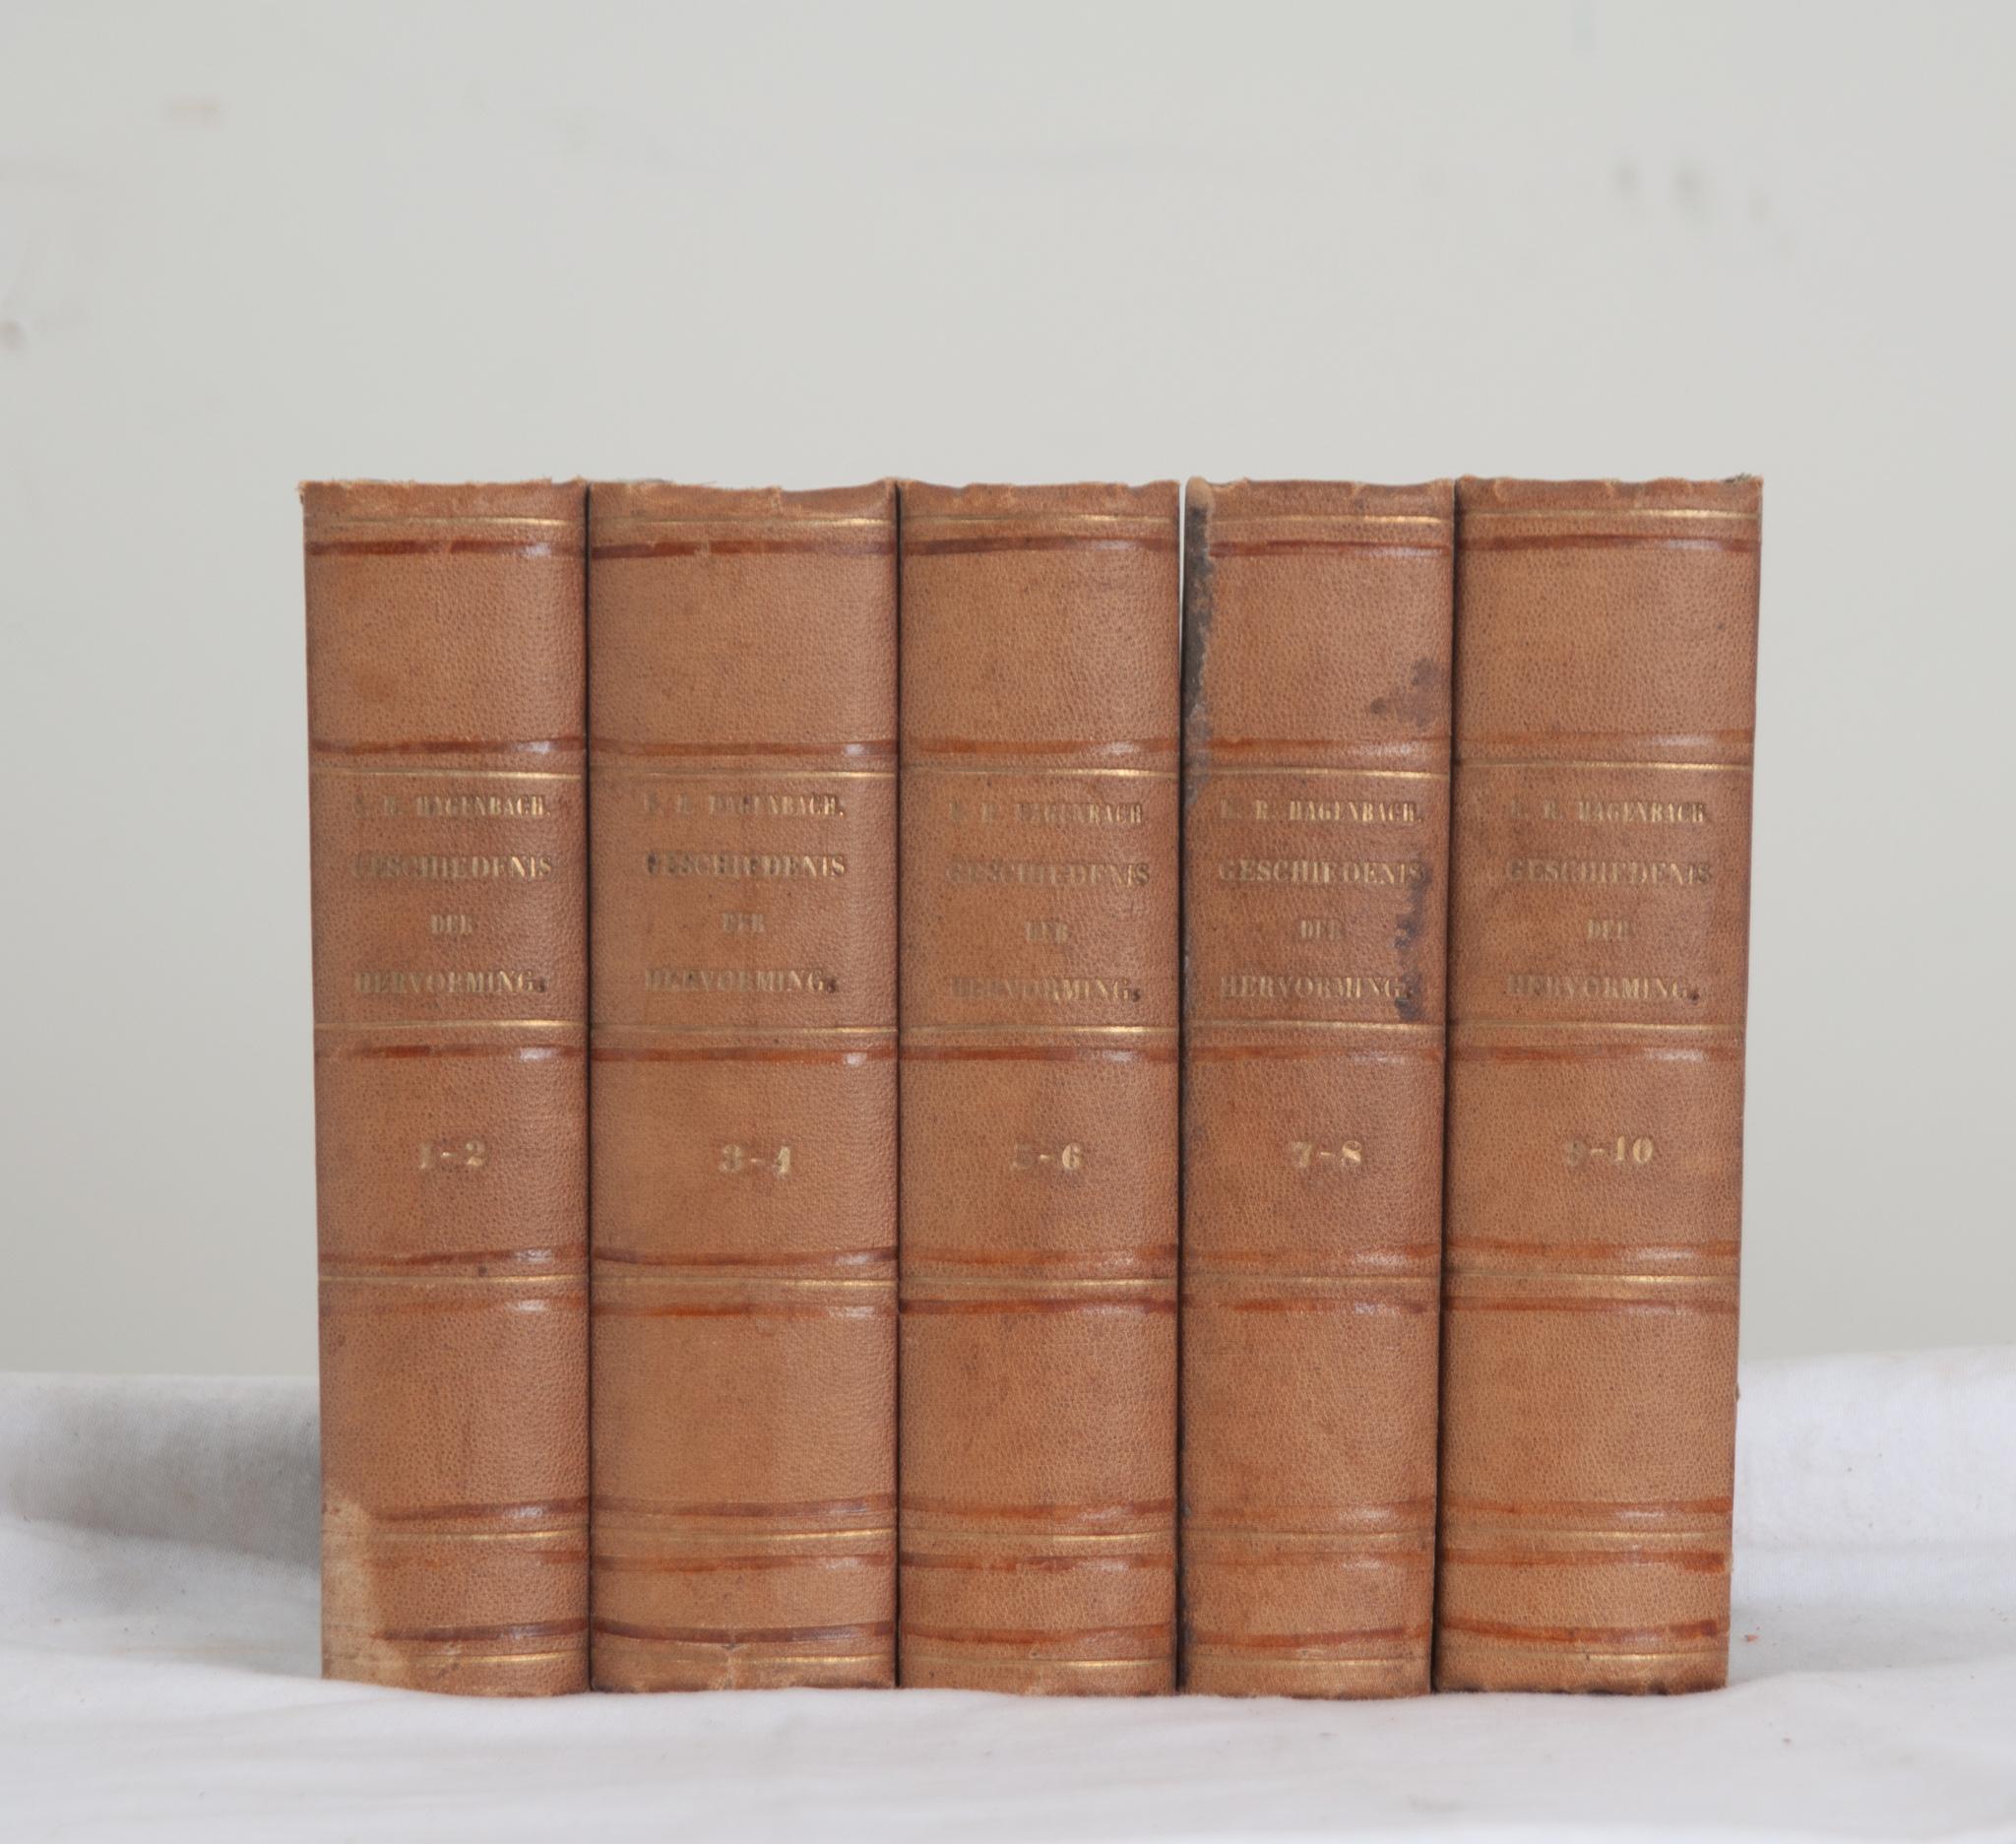 A collection of five volumes on Dutch history by Dr. K. R. Hagenbach. This set of books is leather bound with the title, author, and respective volume number stamped in gold lettering. The Dutch title “Het Wezen en de Geschiedenis der Hervorming''